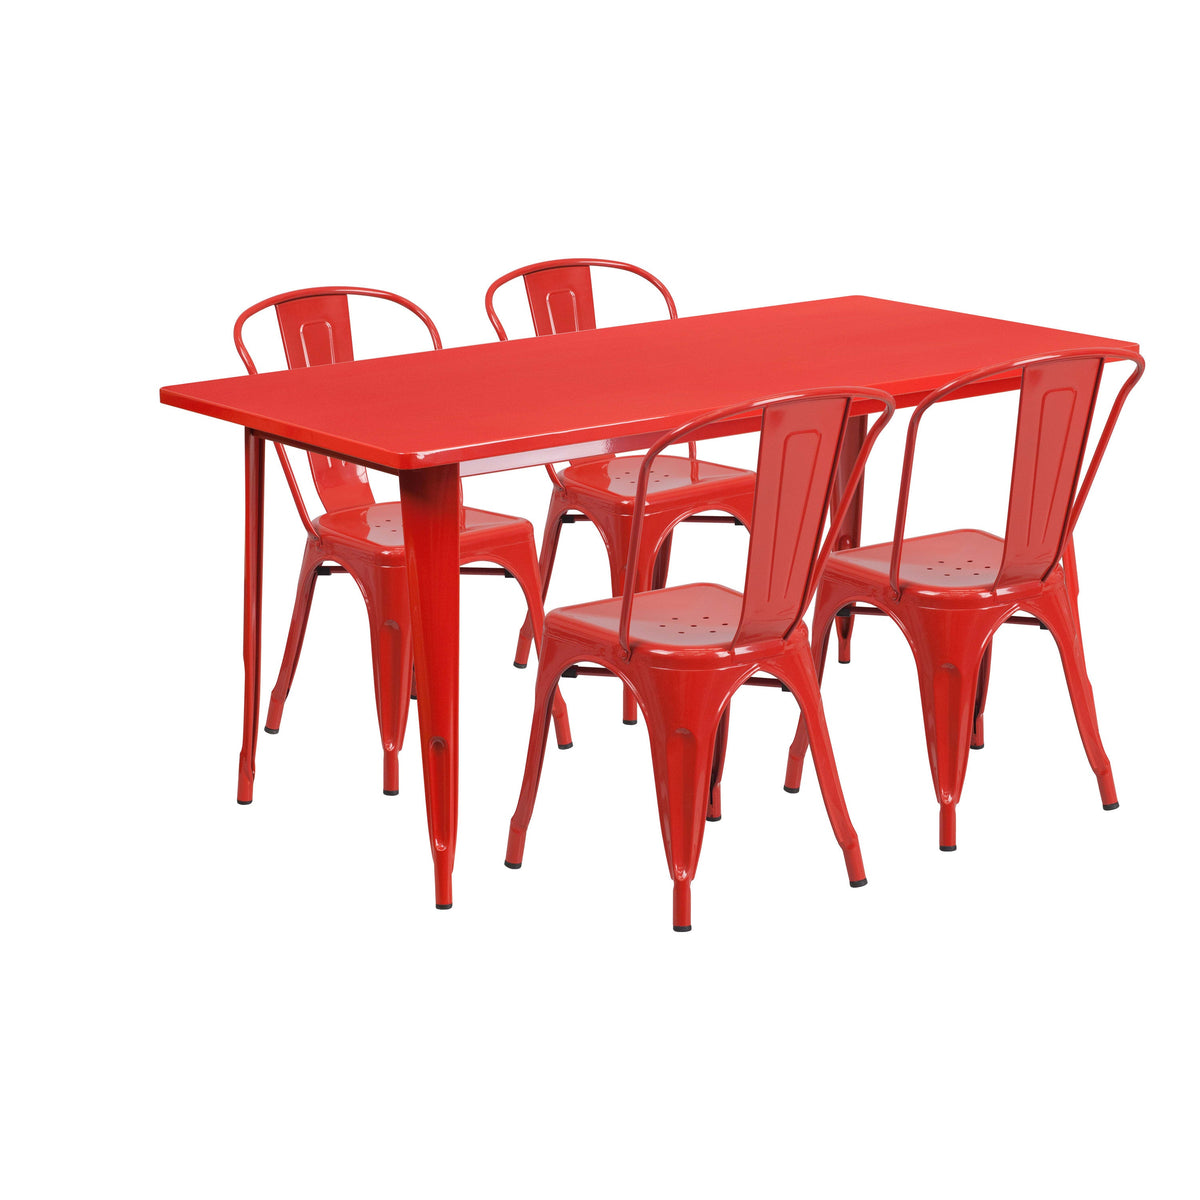 Red |#| 31.5inch x 63inch Rectangular Red Metal Indoor-Outdoor Table Set with 4 Stack Chairs